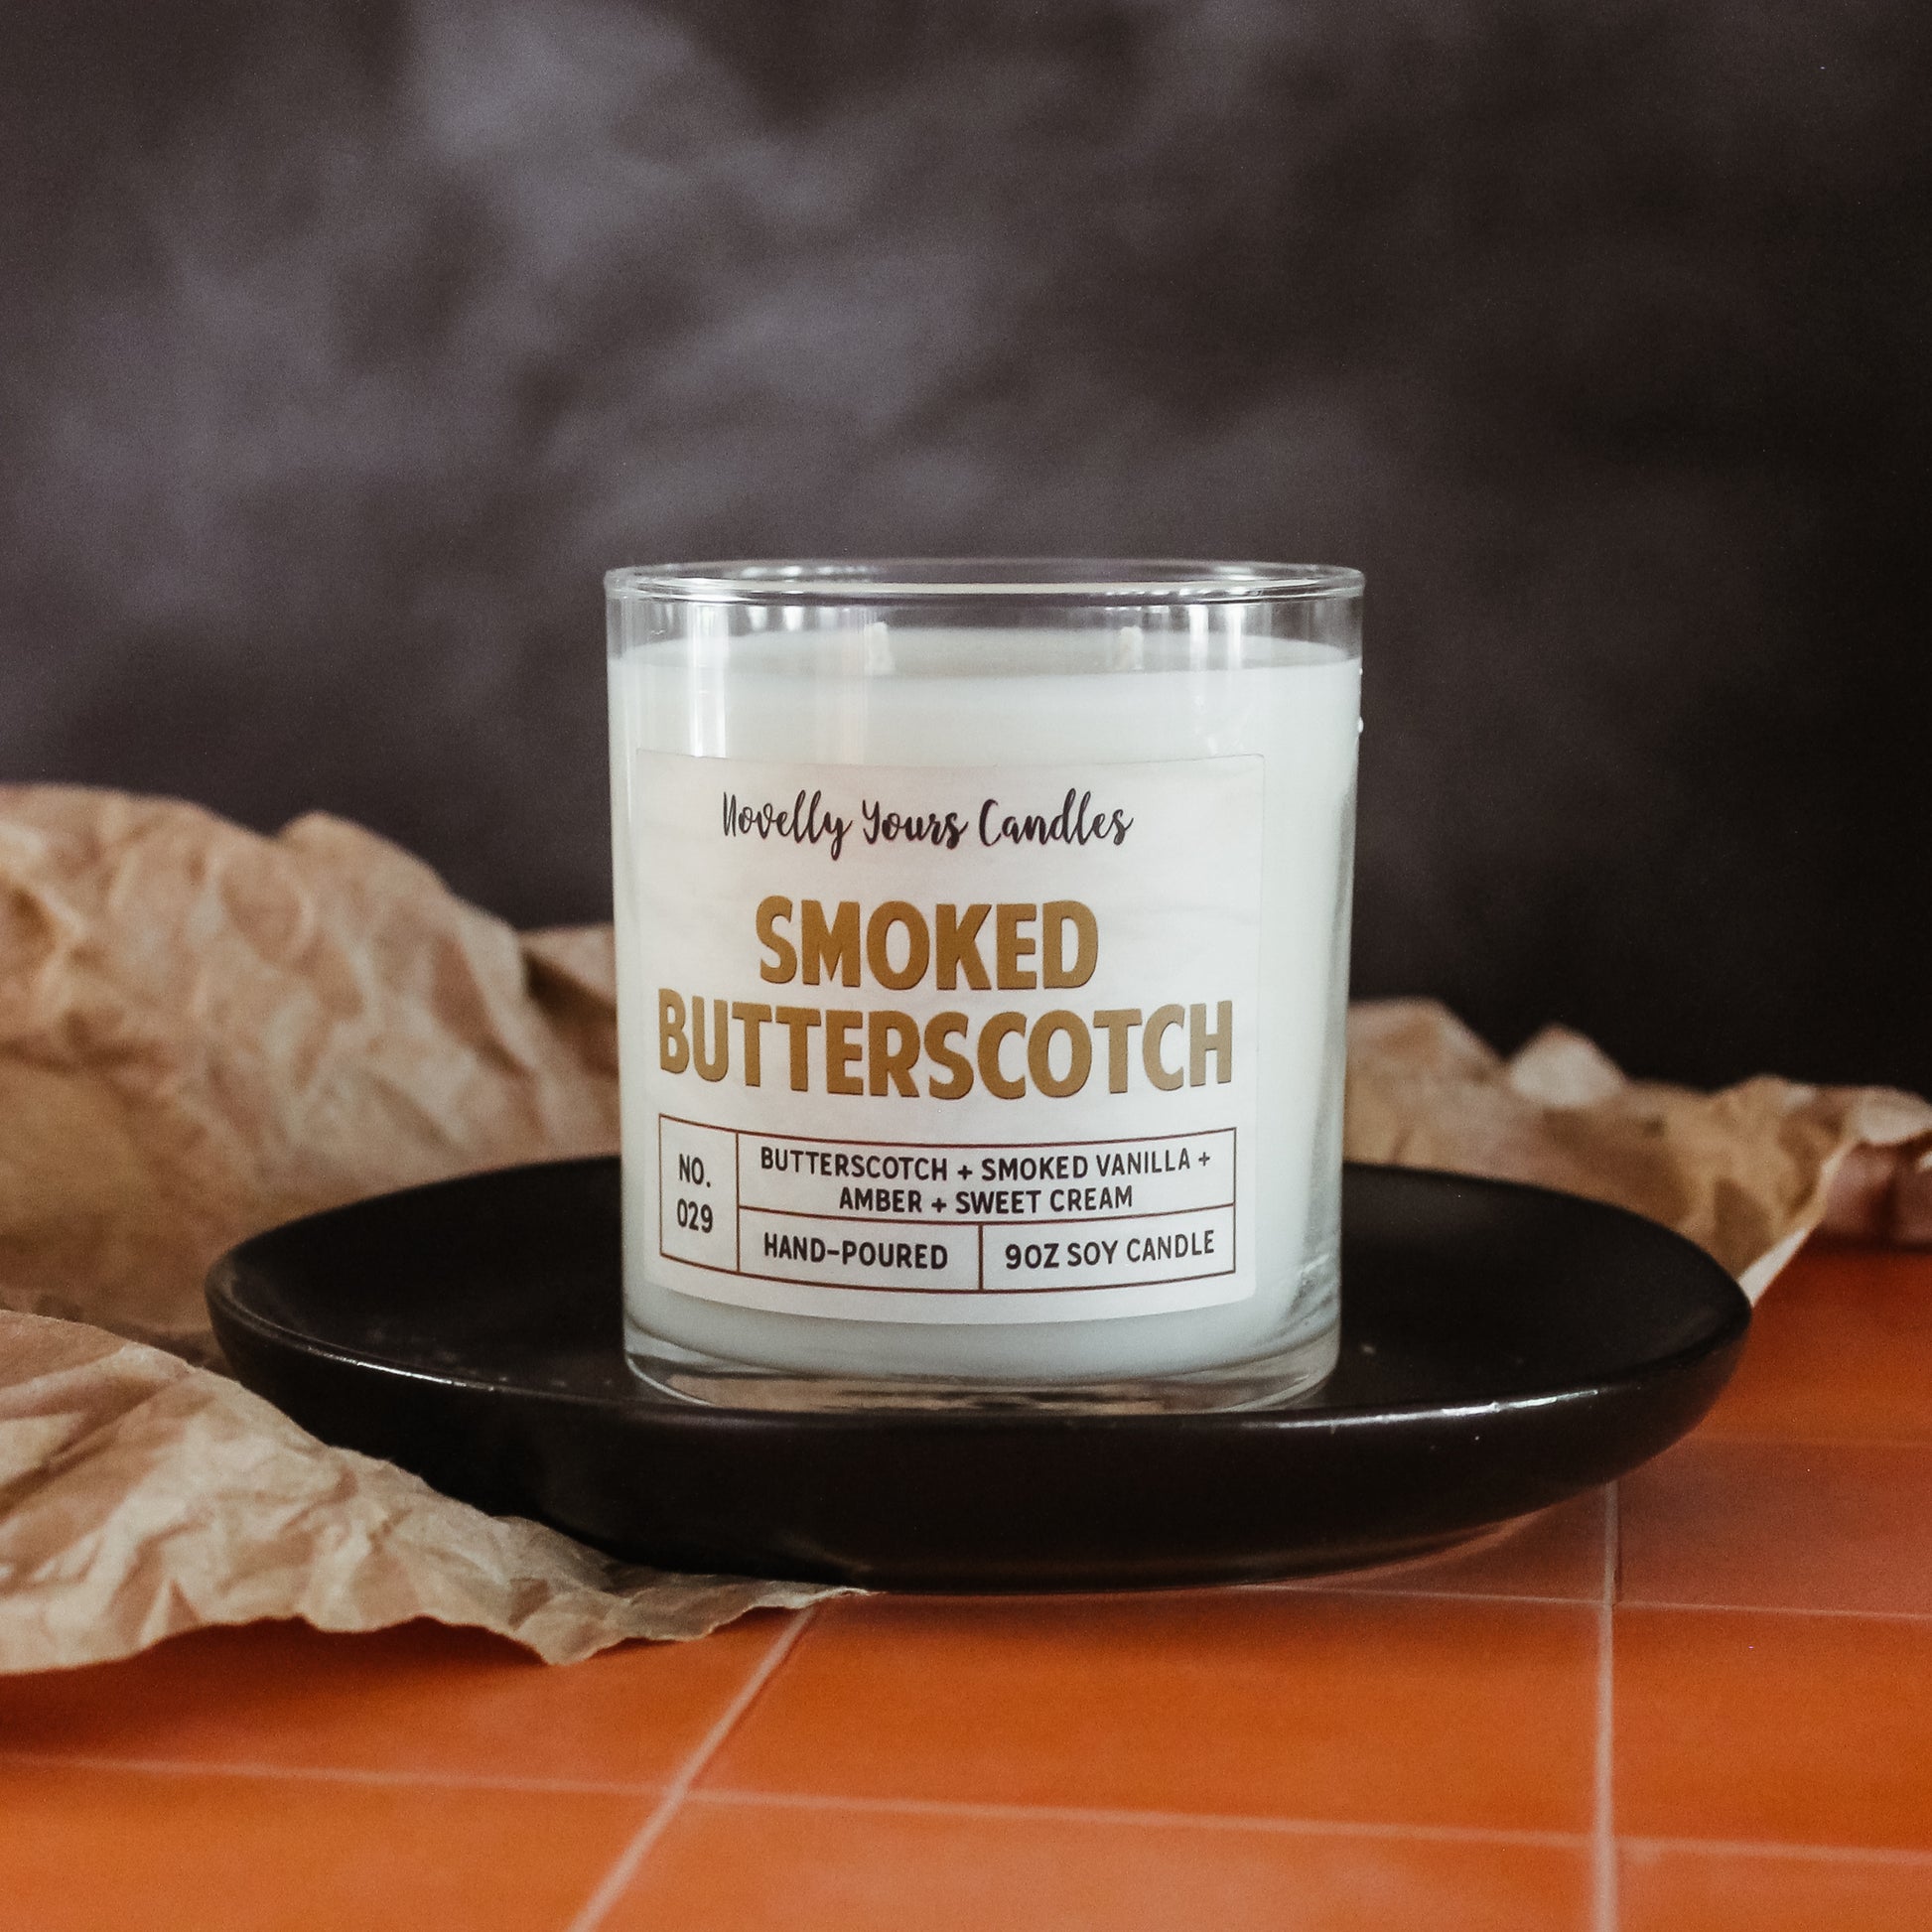 smoked butterscotch scented candle with butterscotch colored text. candle is in clear glass tumbler jar with lid off. Candle sits on round black plate which is on top of orange tiled countertop with smoky black background. brown Kraft paper accents the scene.